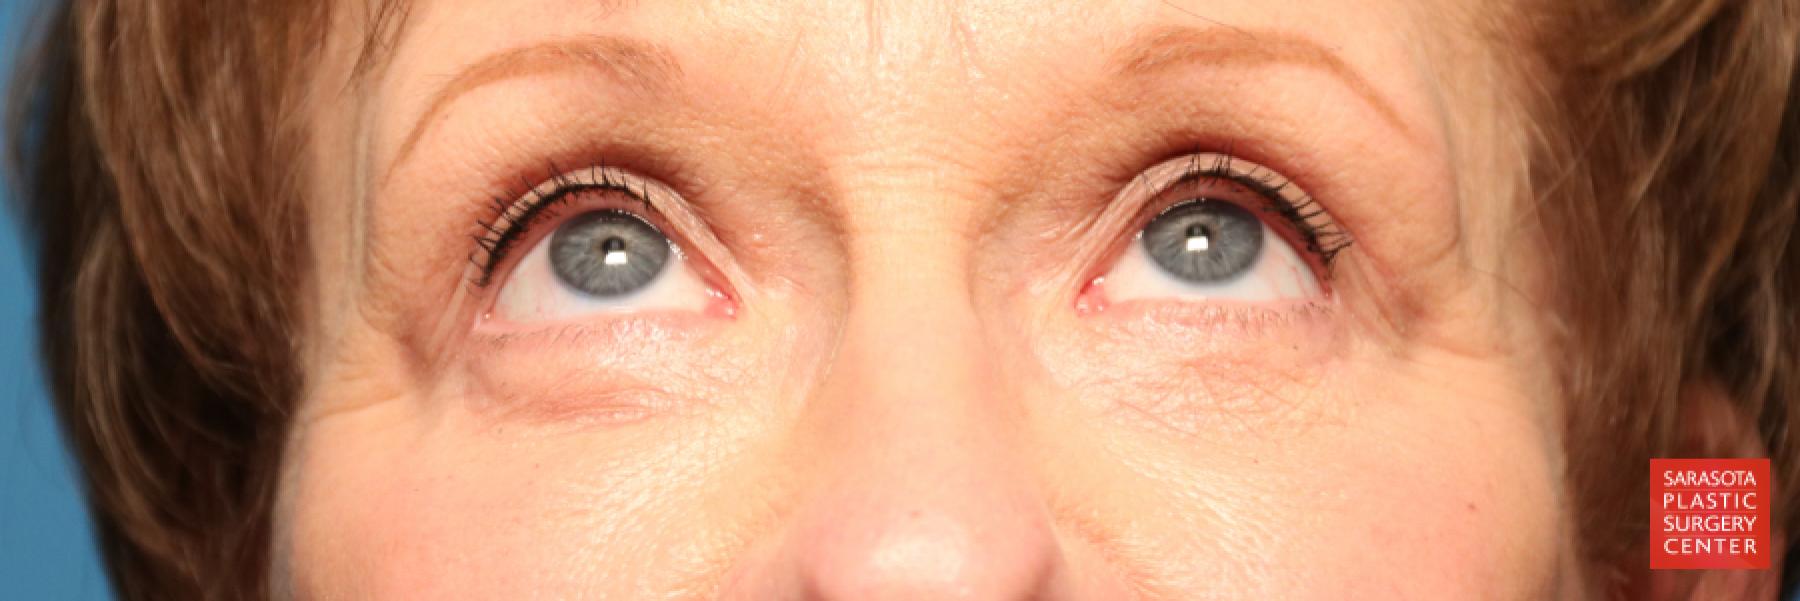 Eyelid Lift: Patient 20 - After 2